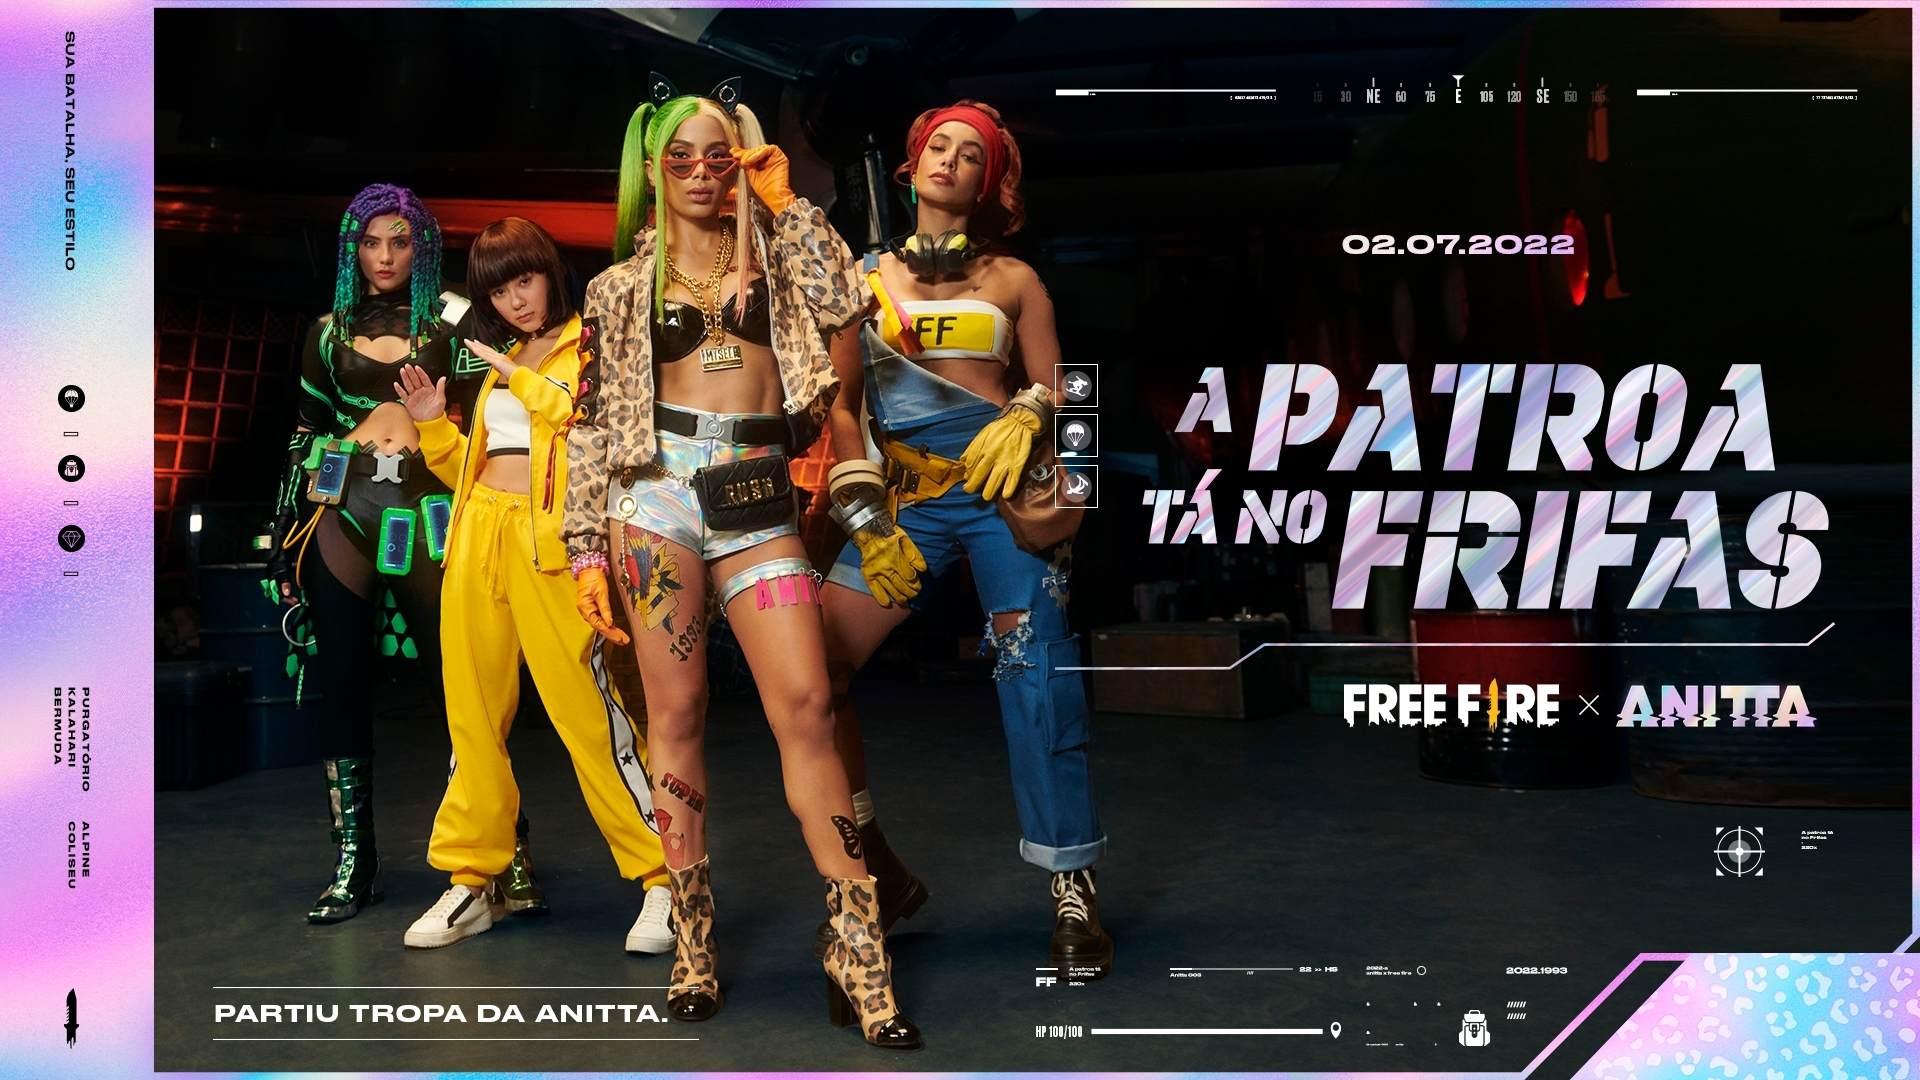 Free Fire and Anitta release music and official clip for the arrival of “Patroa”